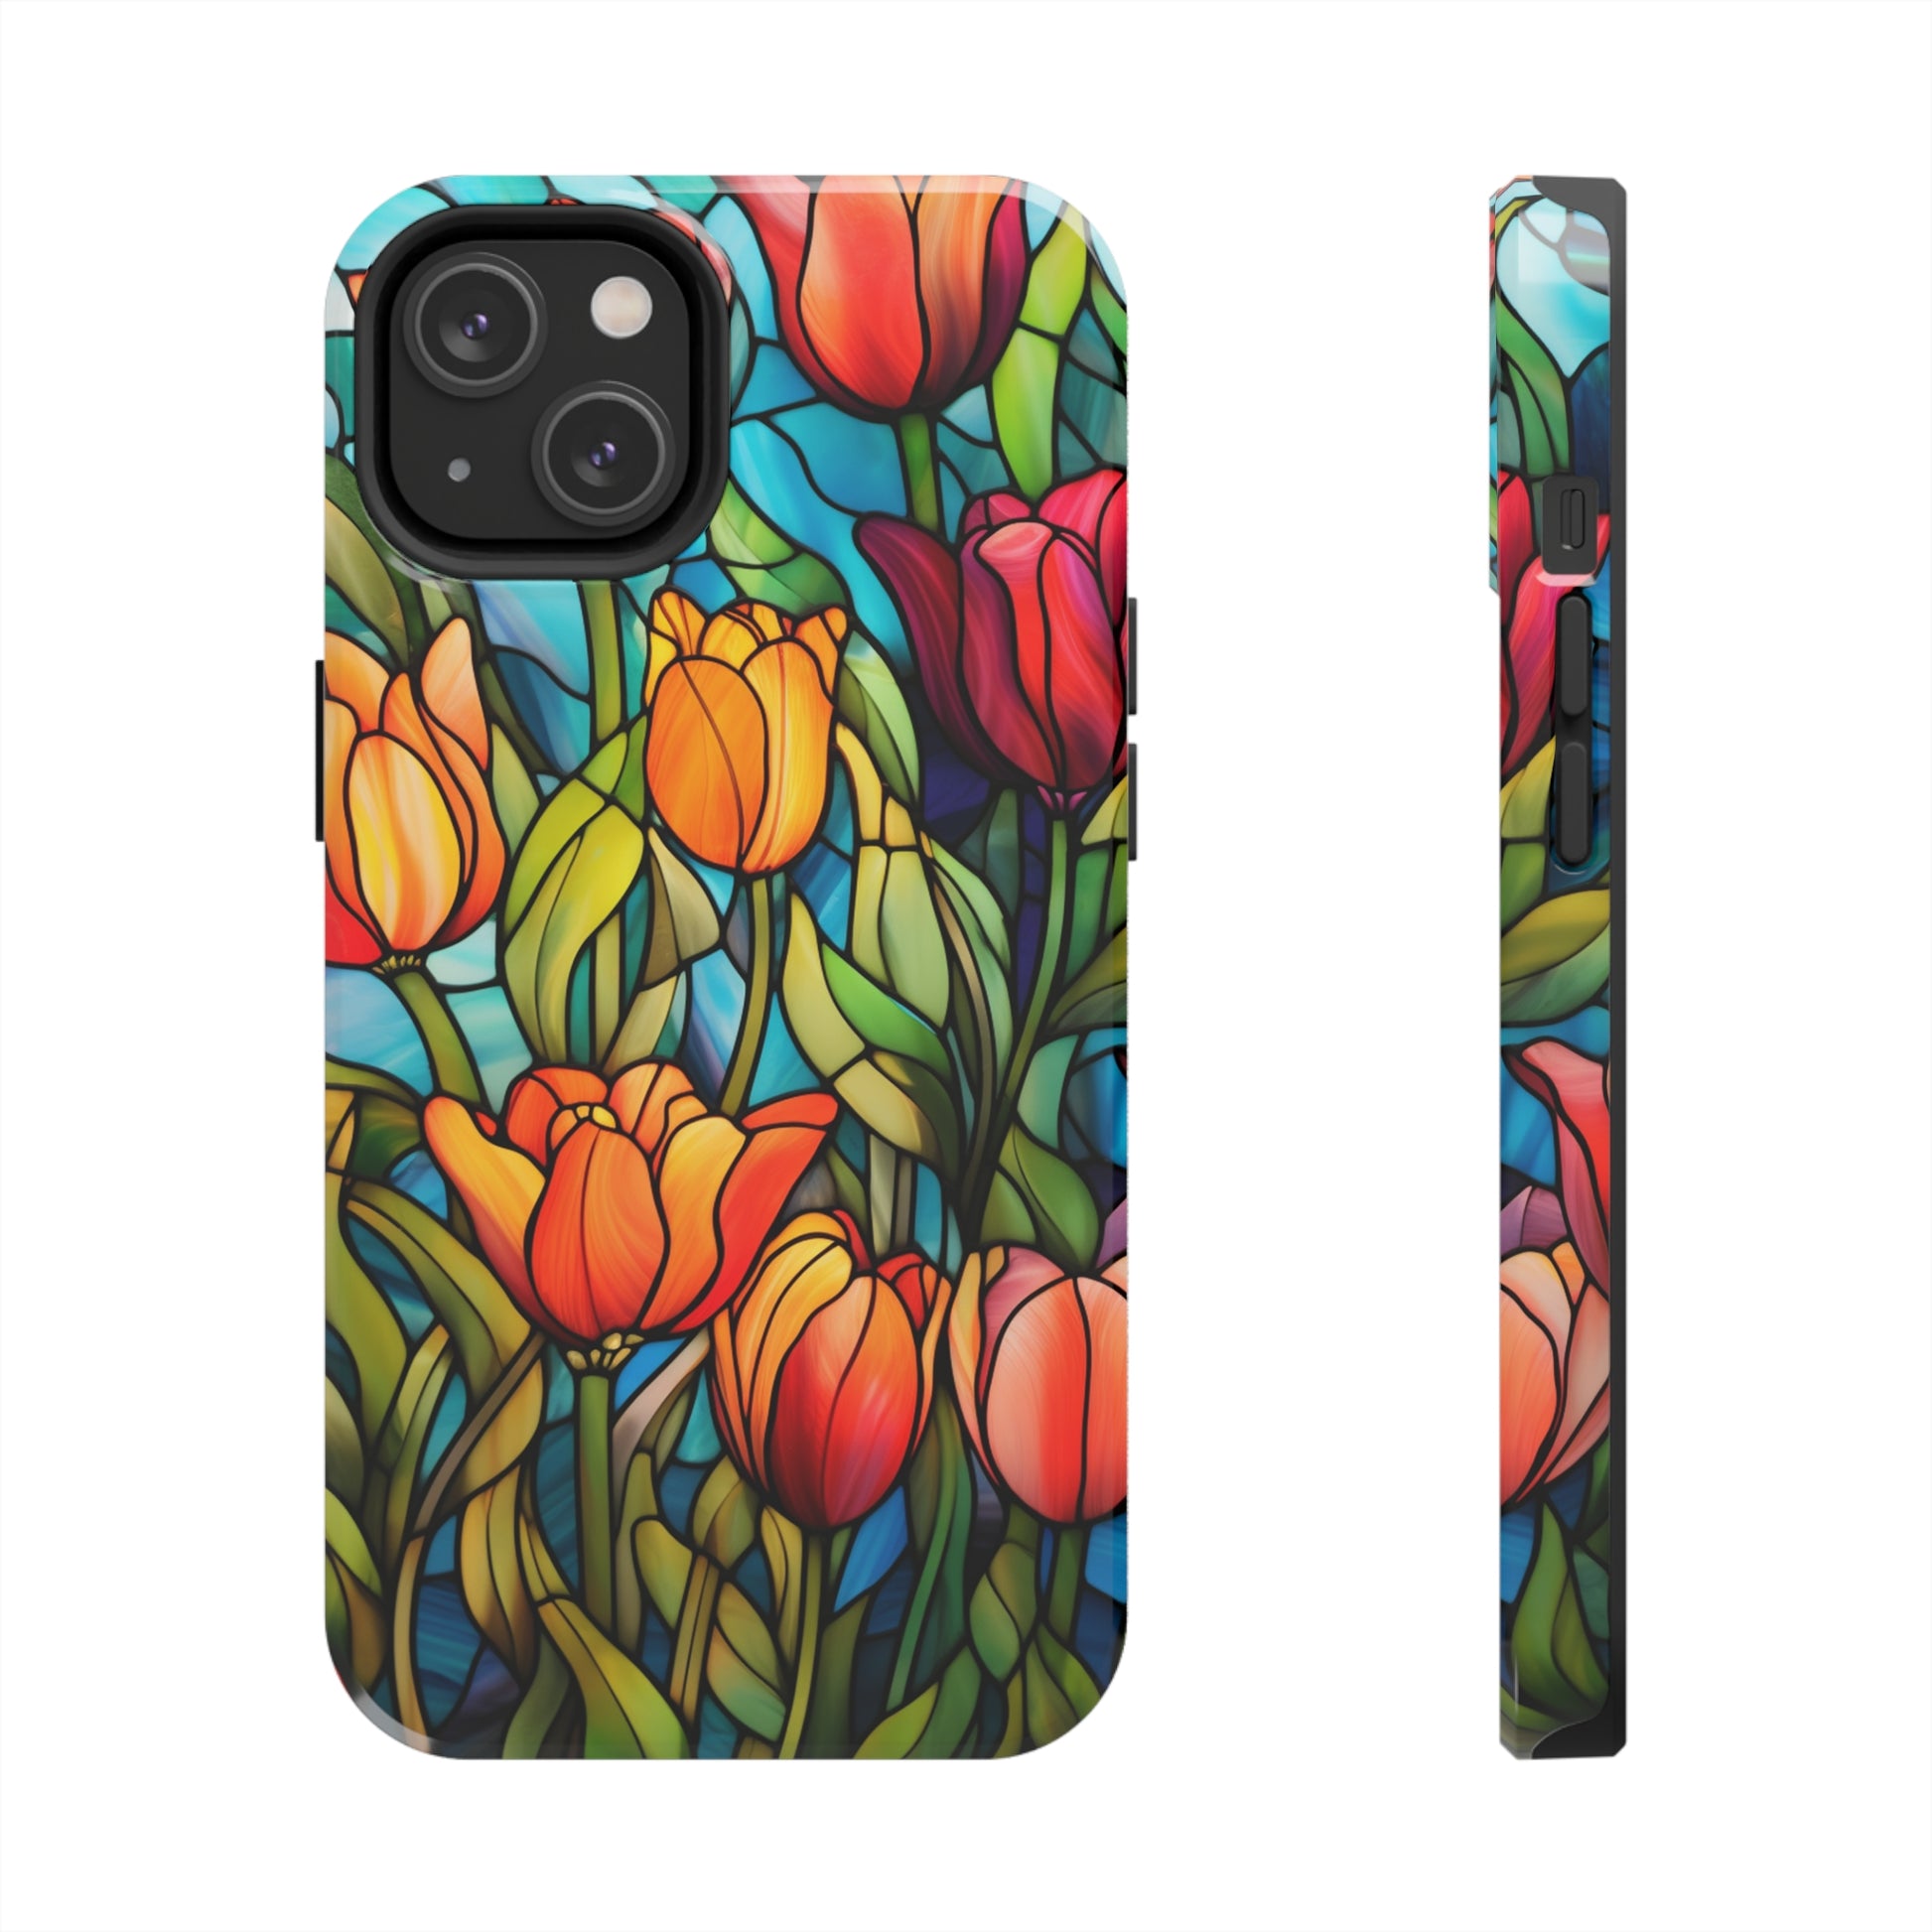 Vibrant Nature-Inspired iPhone Case